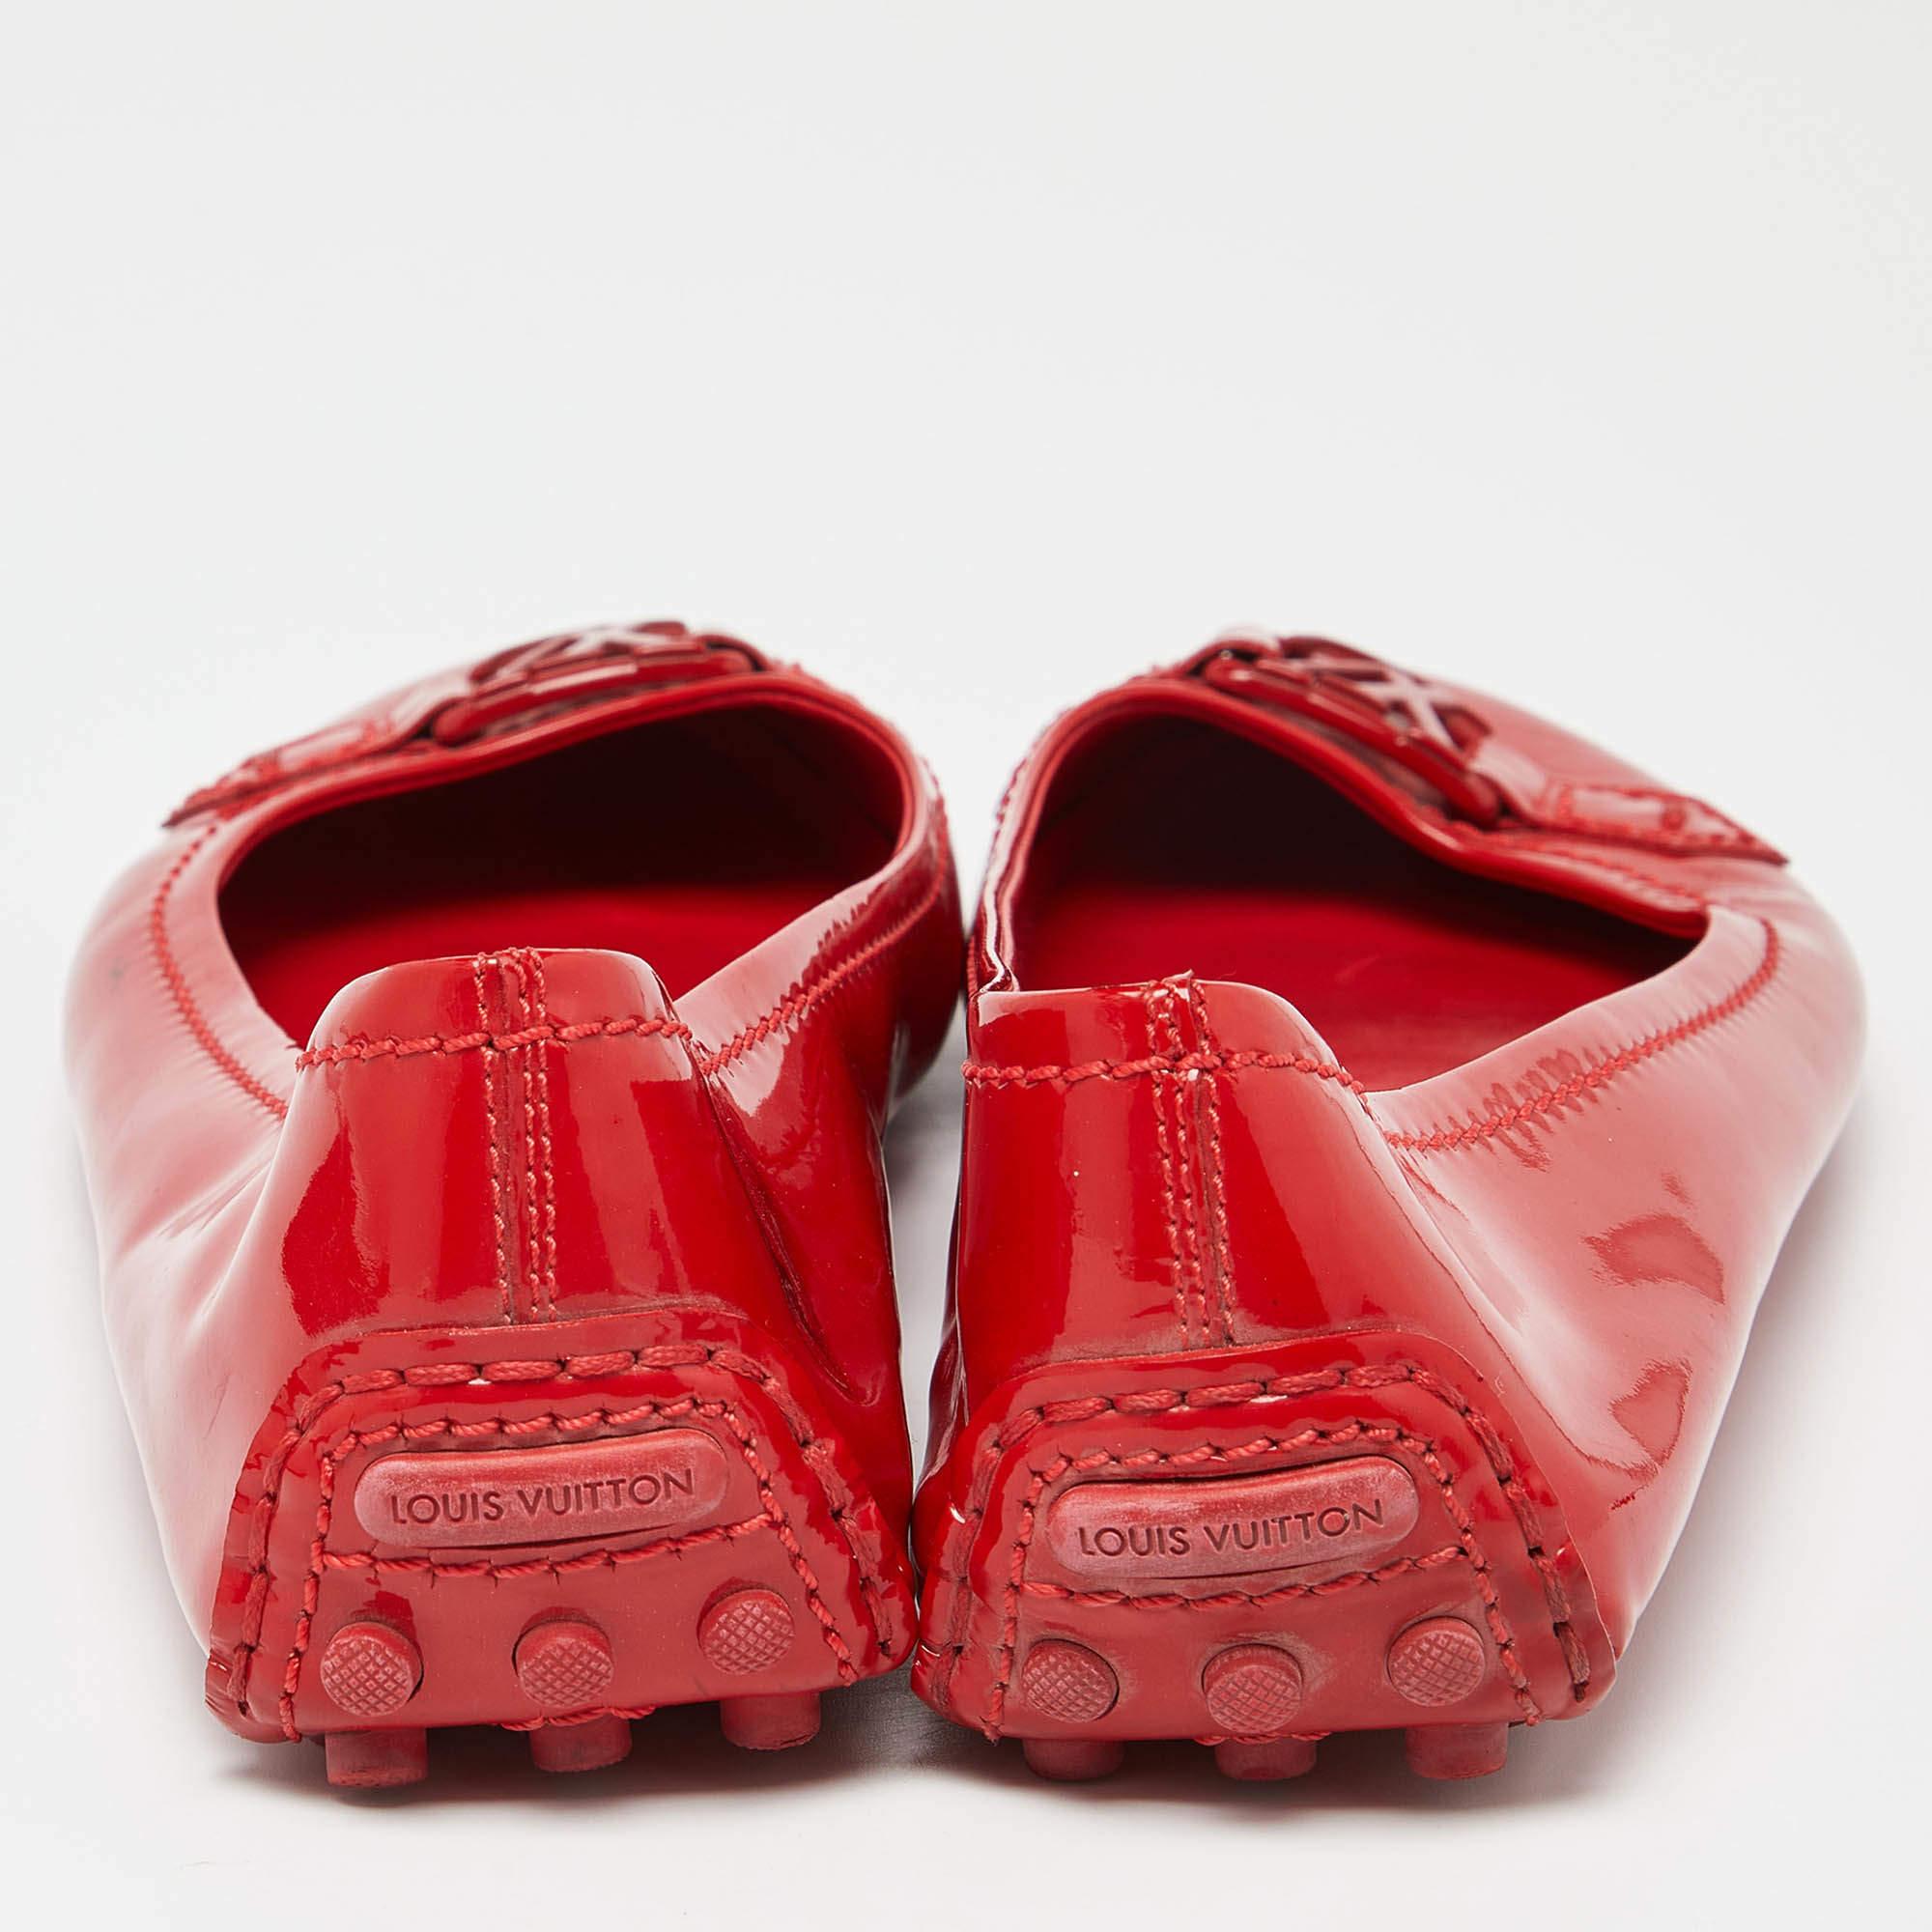 Louis Vuitton Red Patent Leather Oxford Ballet Flats Size 38 For Sale 3